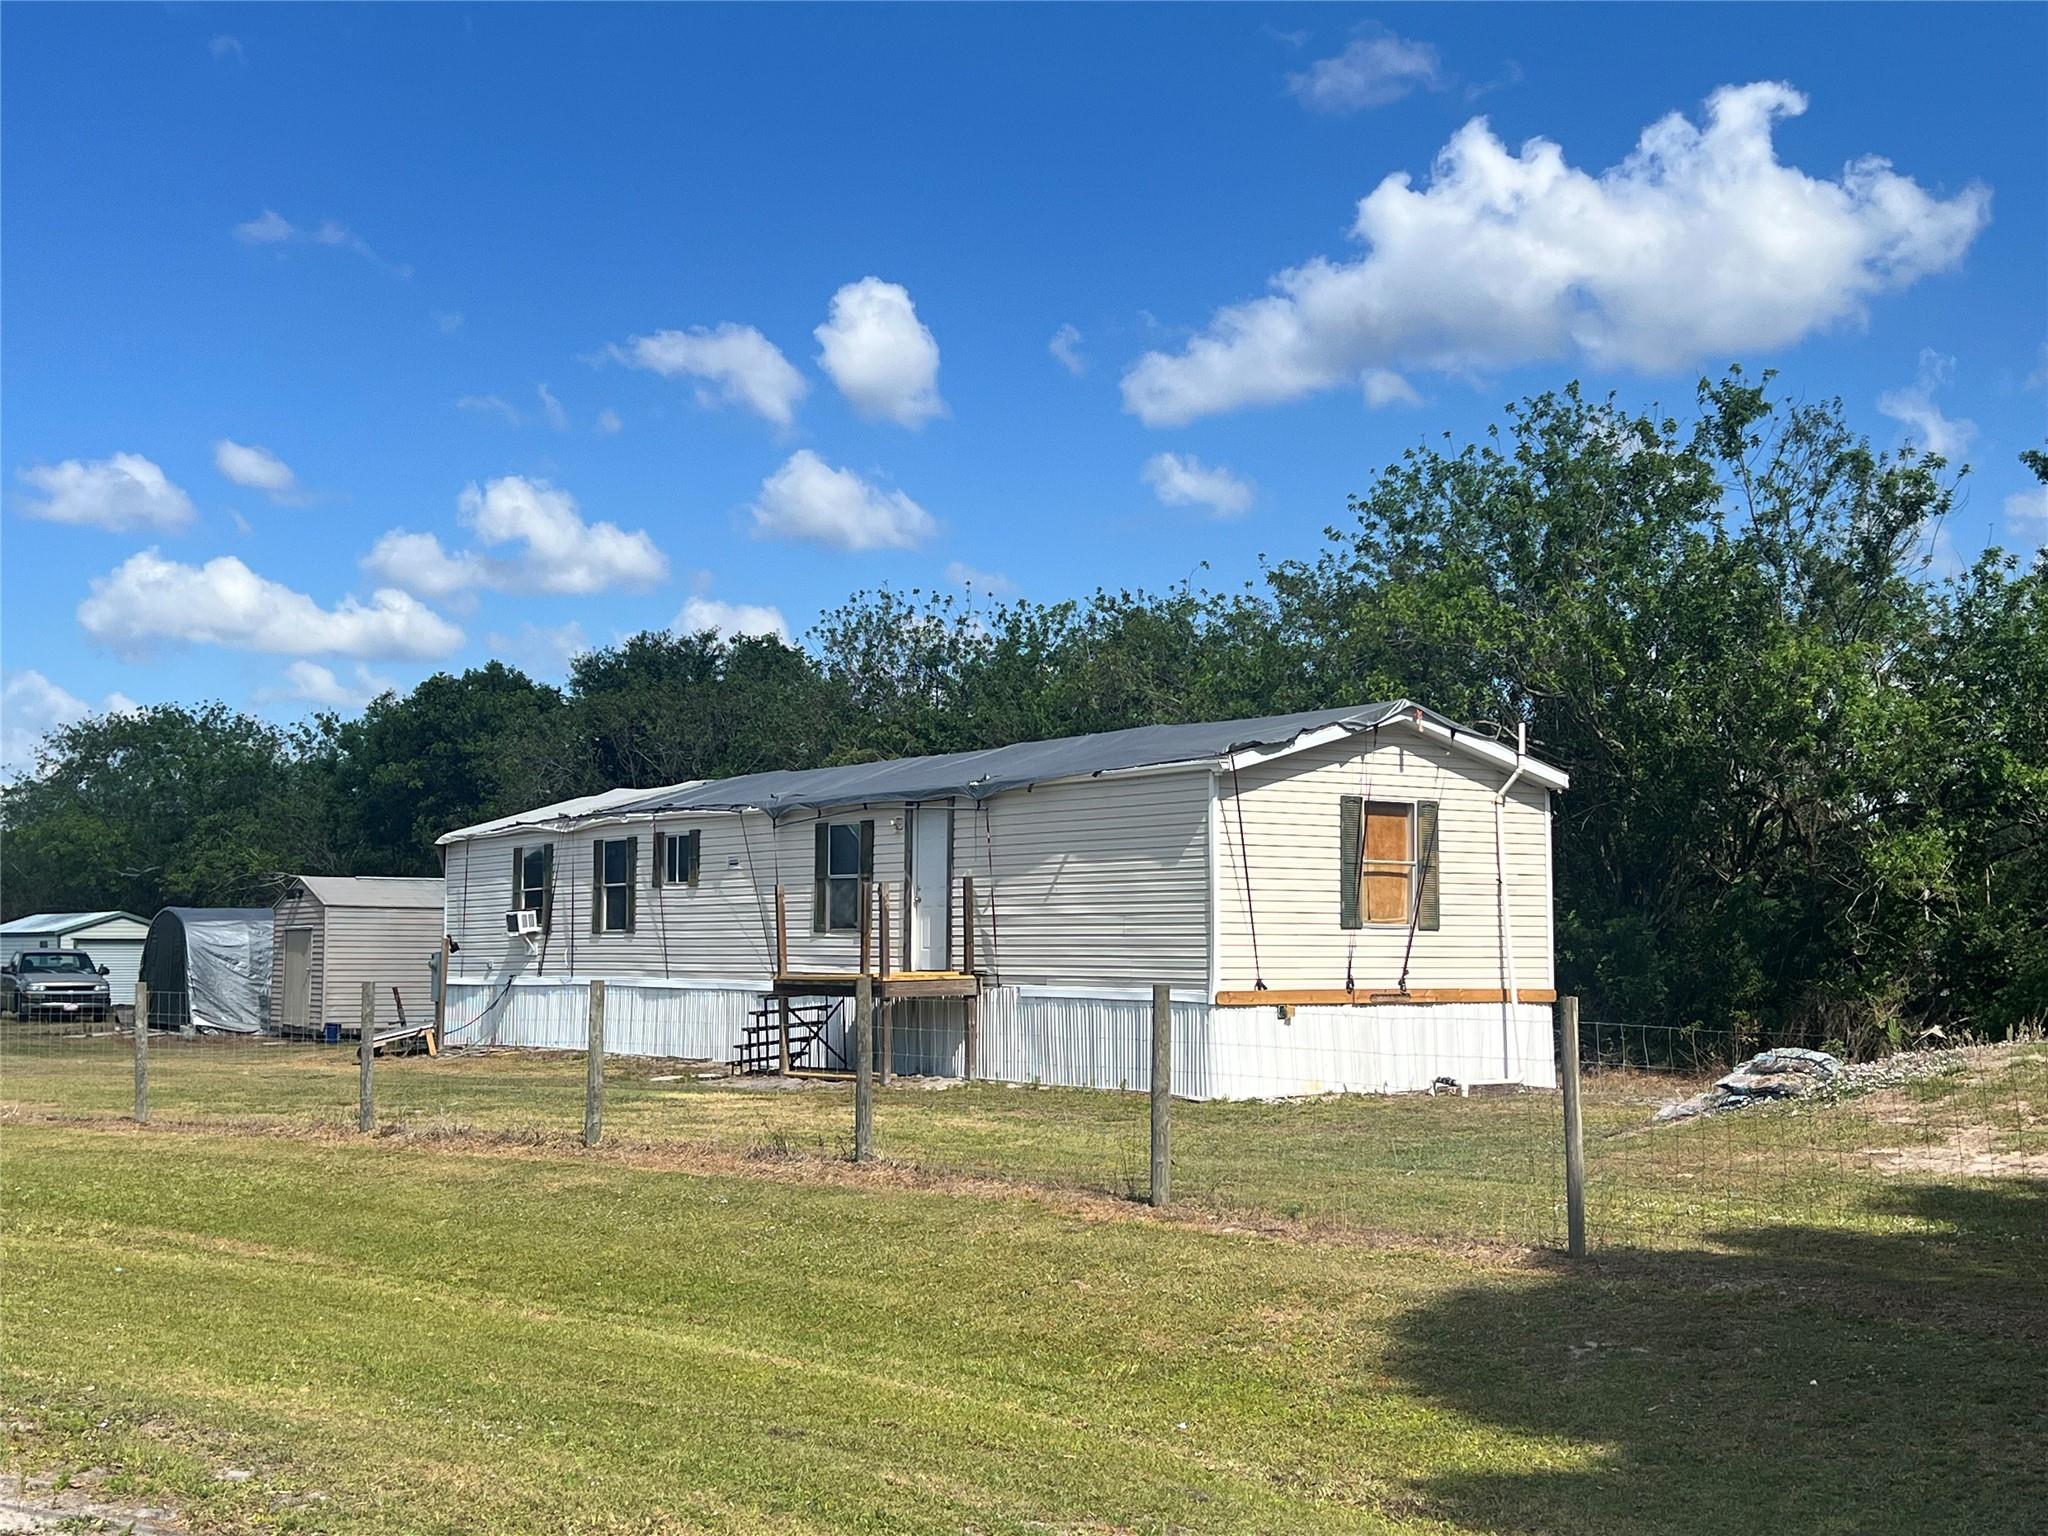 FIXER UPPER 2bd/2ba on 1/2 acre on the east side of Okeechobee. Needs love and attention from its new owner, you can create the space you want it to be and have it back to brand new in no time! Priced to sell fast, come on investors!